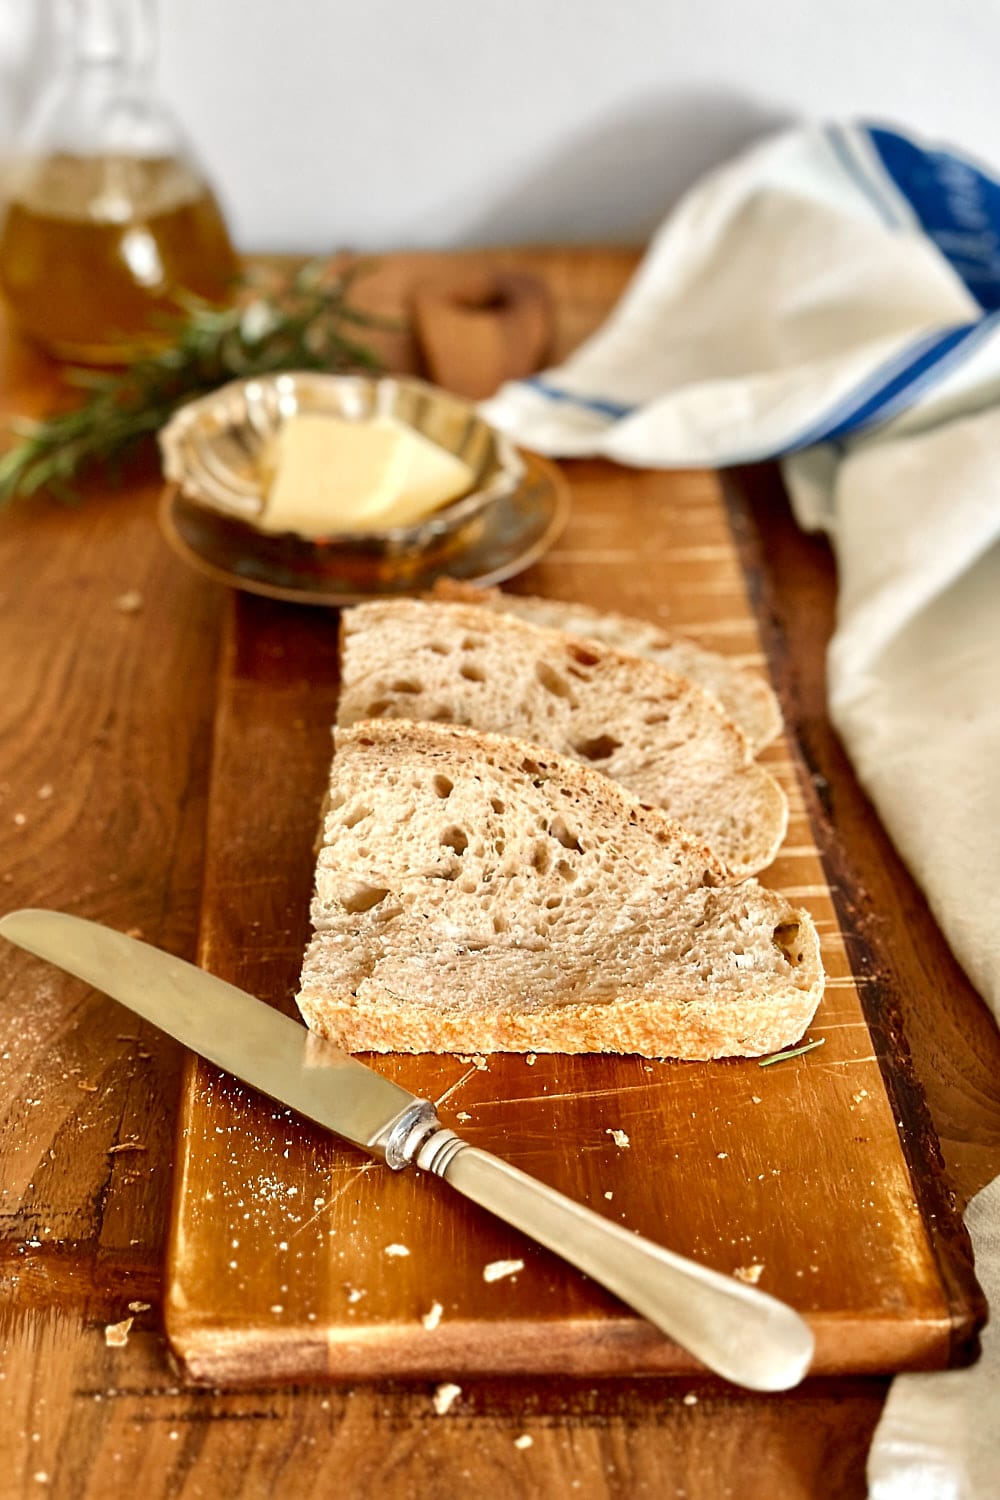 Three slices of rosemary sourdough bread on a wooden board with some butter and a knife next to it.